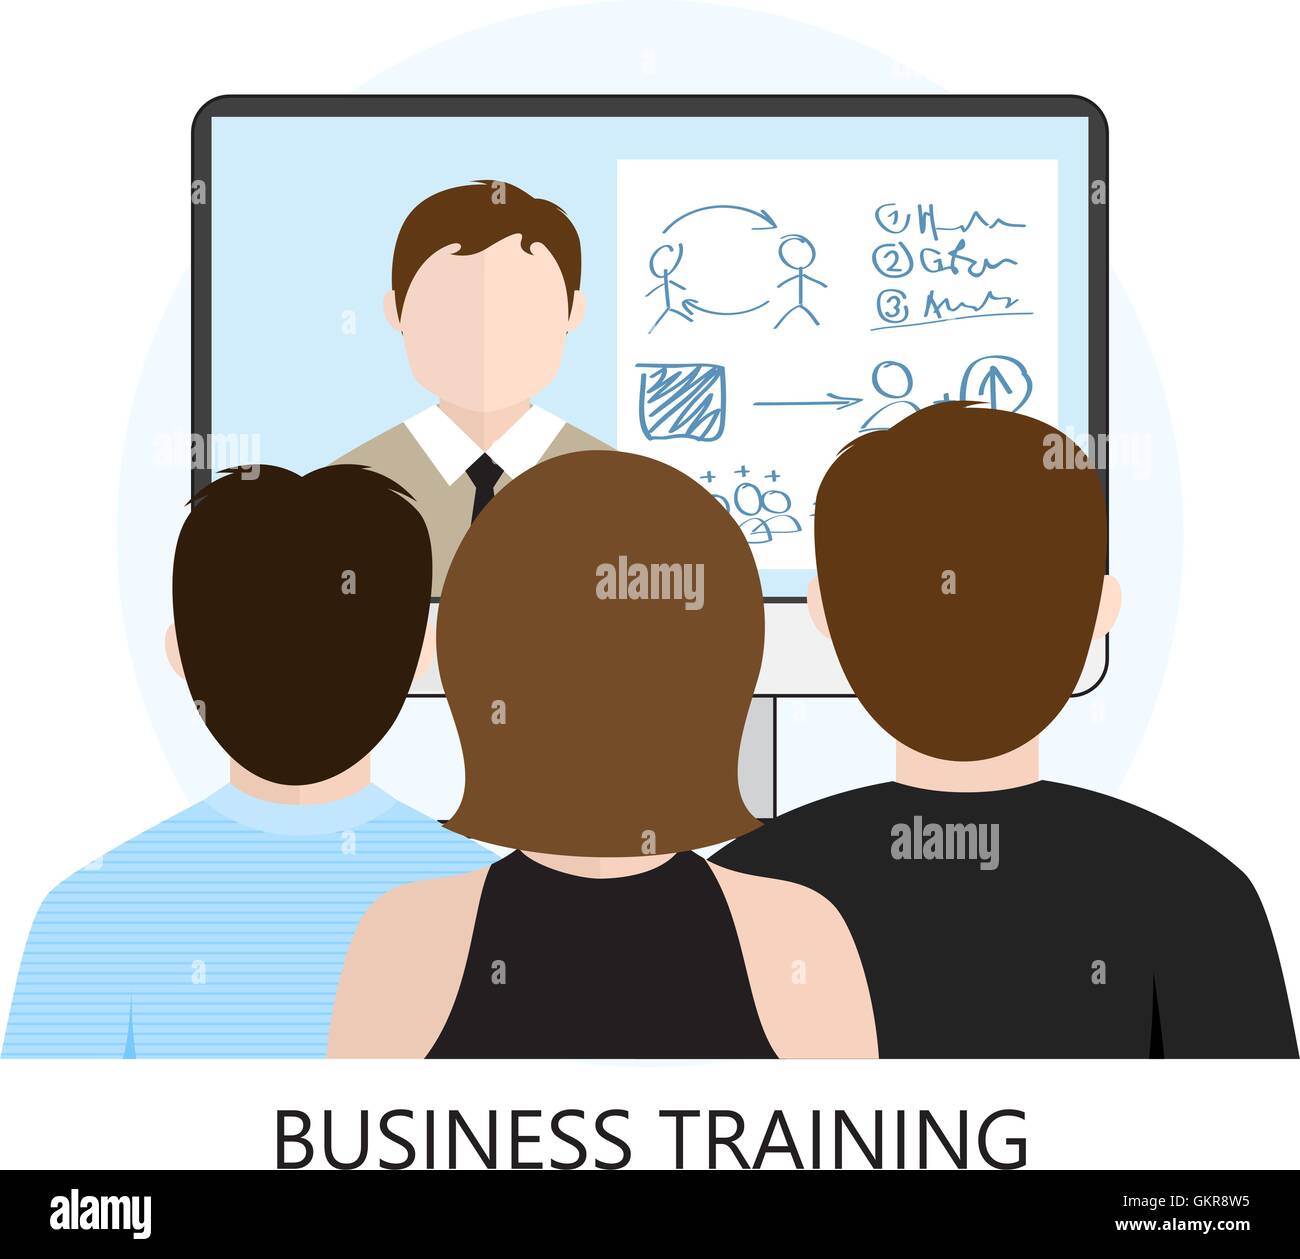 Business Training Icon Flat Design Concept Stock Vector